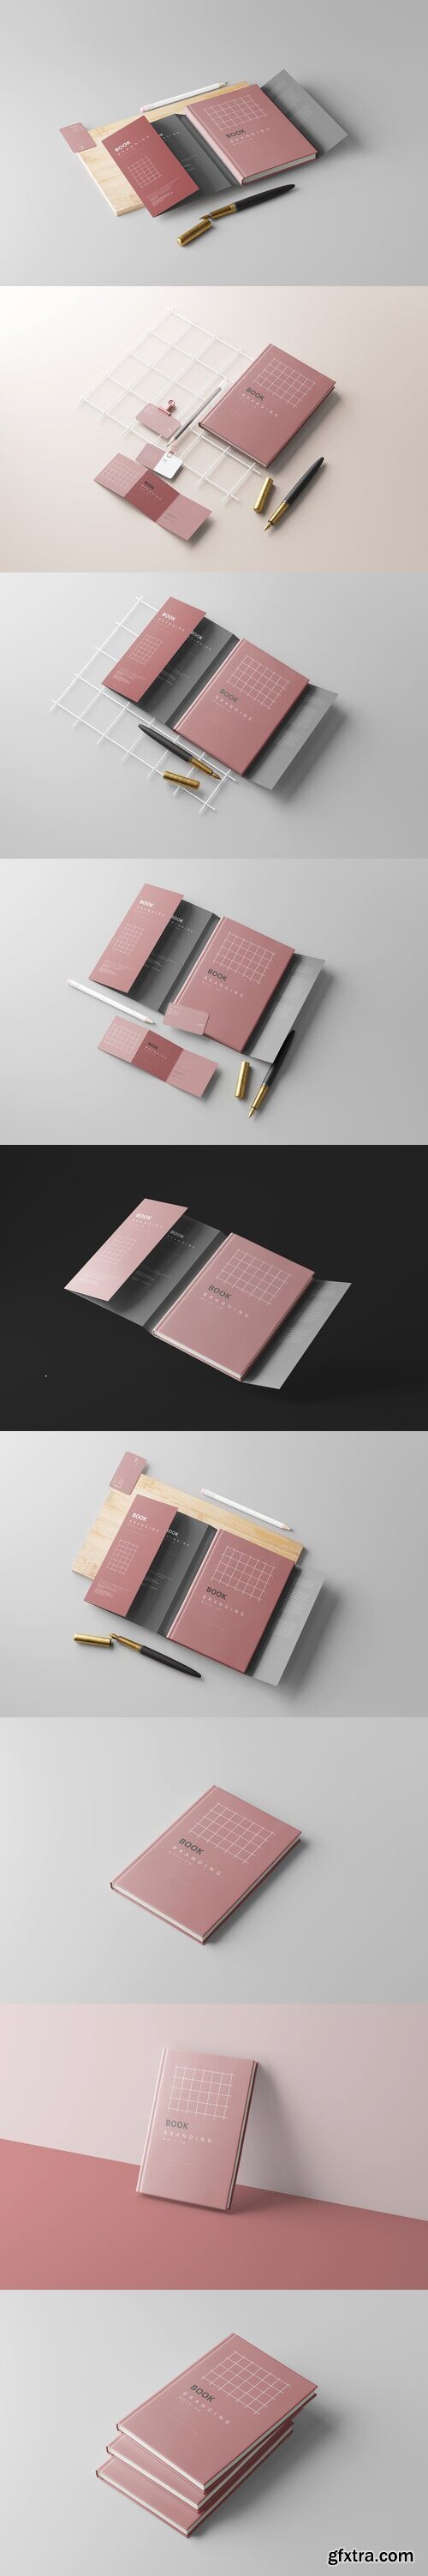 CreativeMarket - Book with Dust Jacket Mockups 7486553